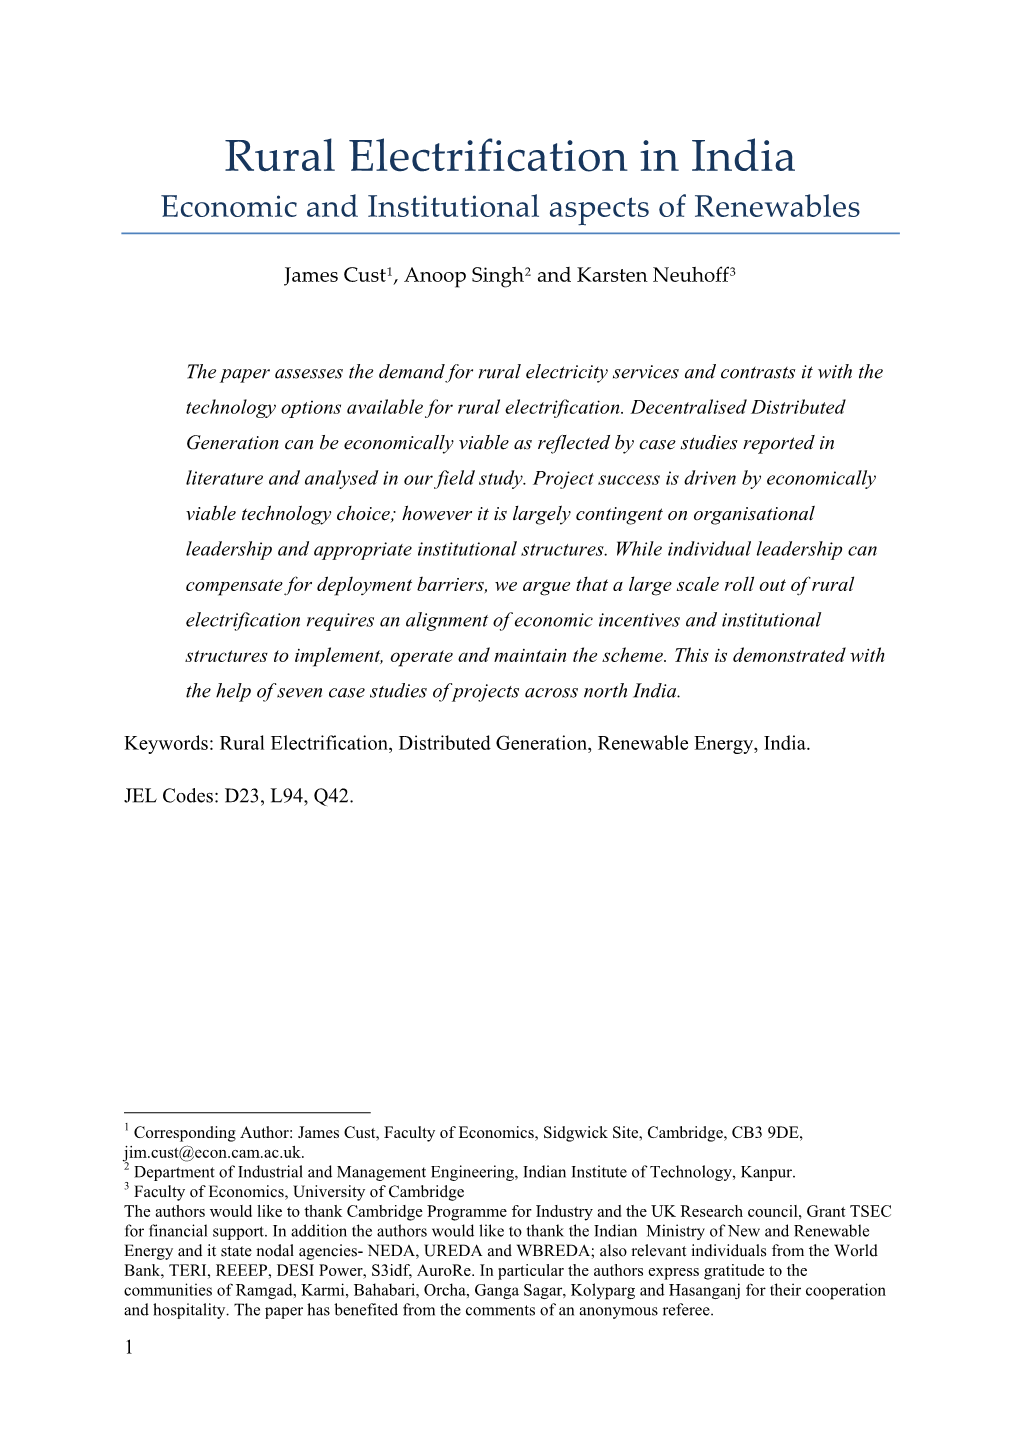 Rural Electrification in India Economic and Institutional Aspects of Renewables